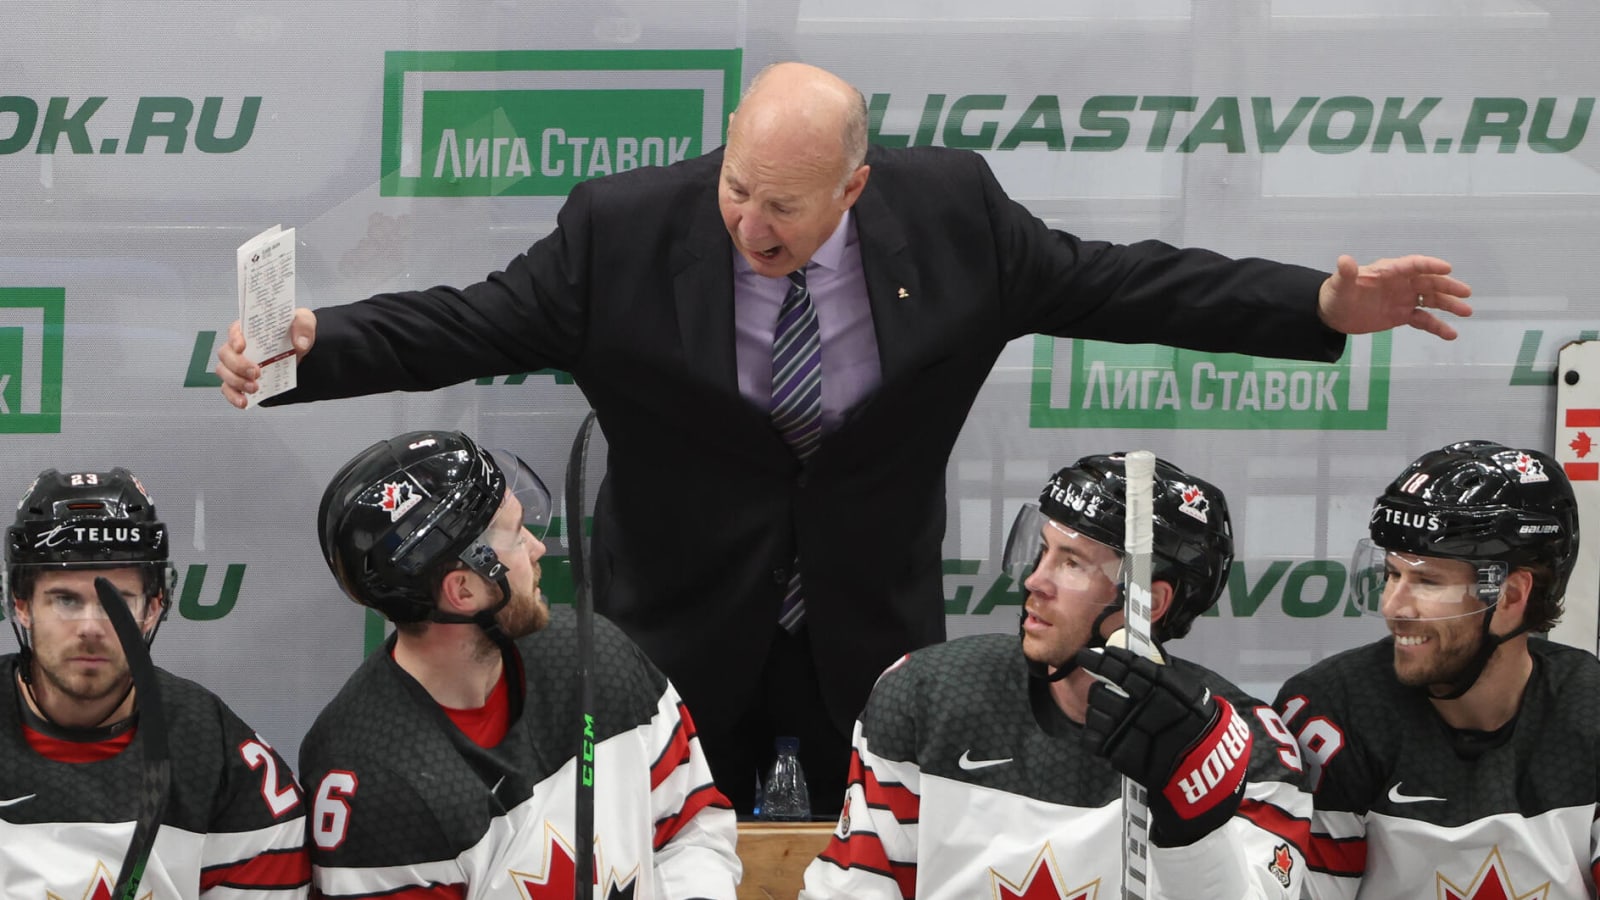 Canada's Claude Julien recovers from injury, 'will reassume' job